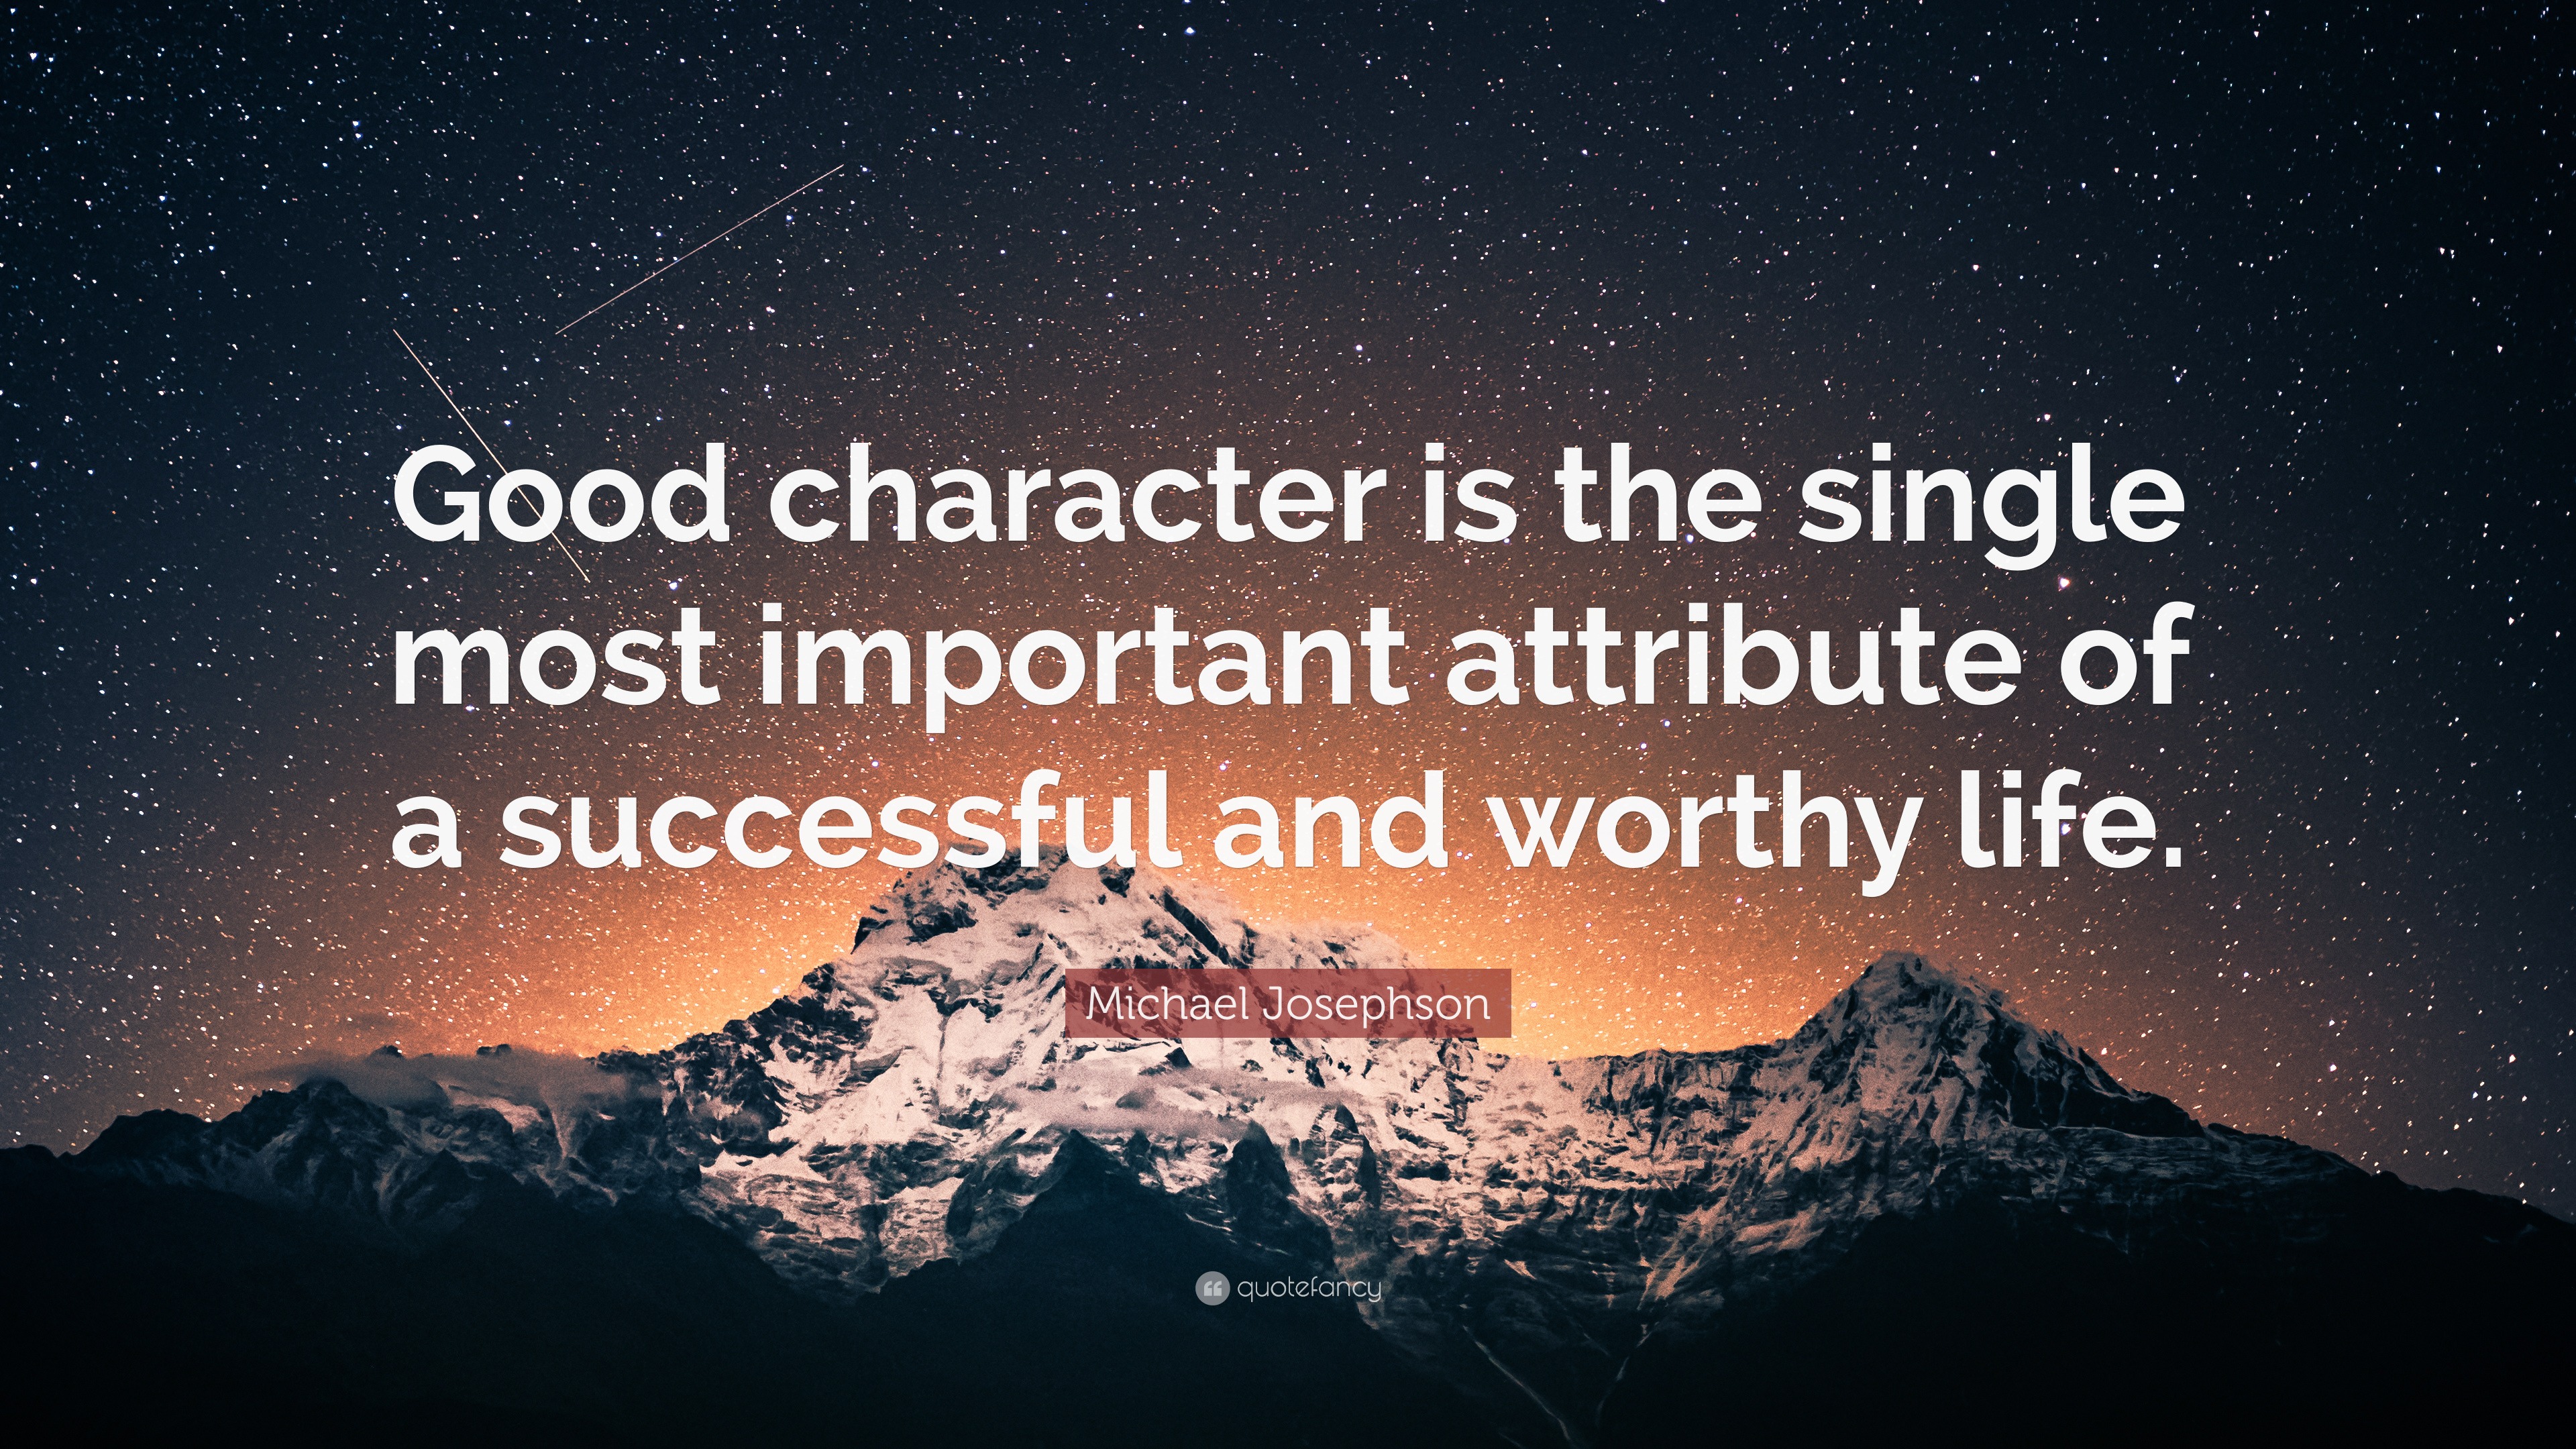 Michael Josephson Quote: “Good character is the single most important